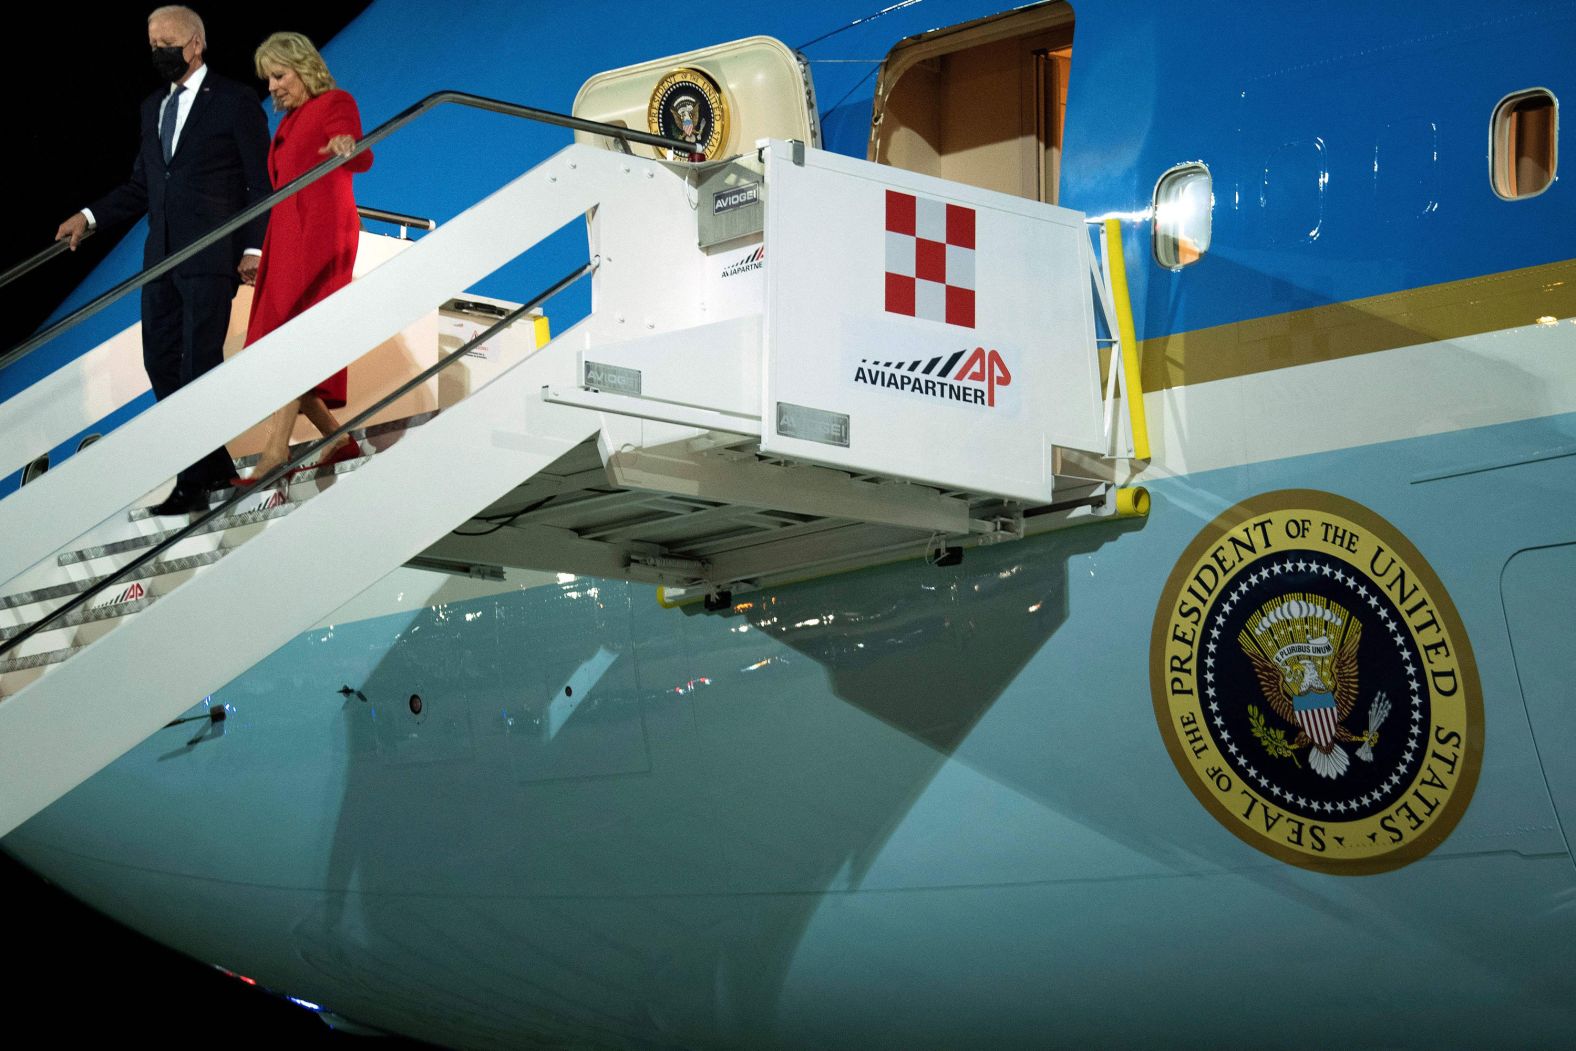 The Bidens disembark from Air Force One after arriving in Italy.